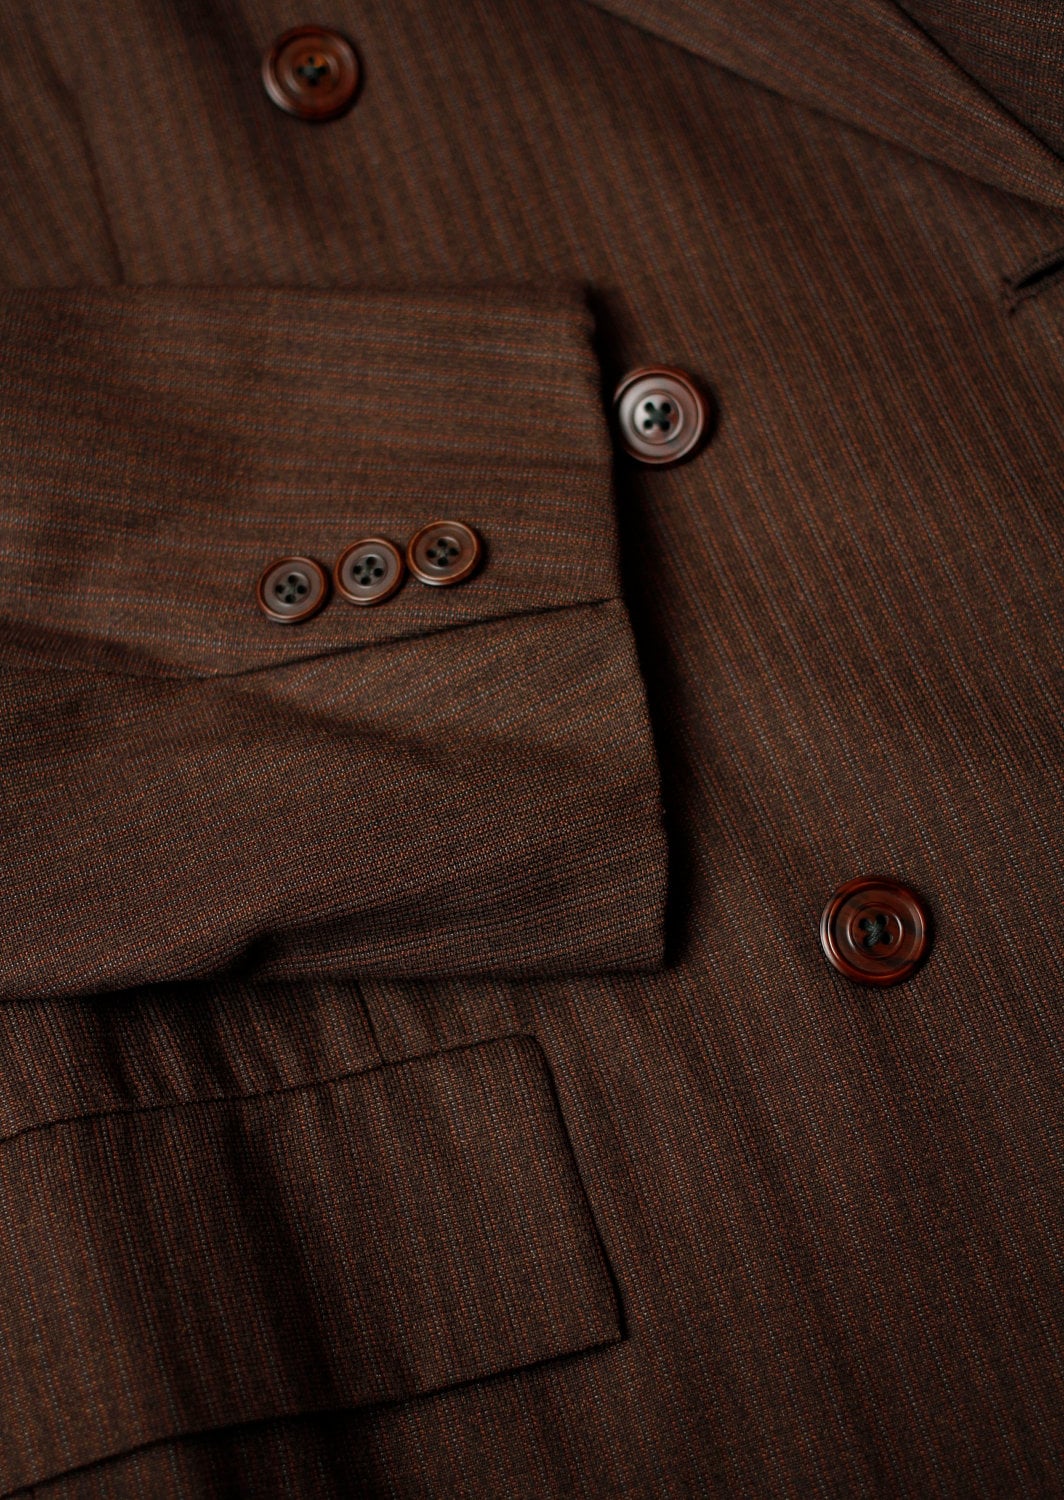 1950's Men's Brown Double Breasted Suit 40R SALE